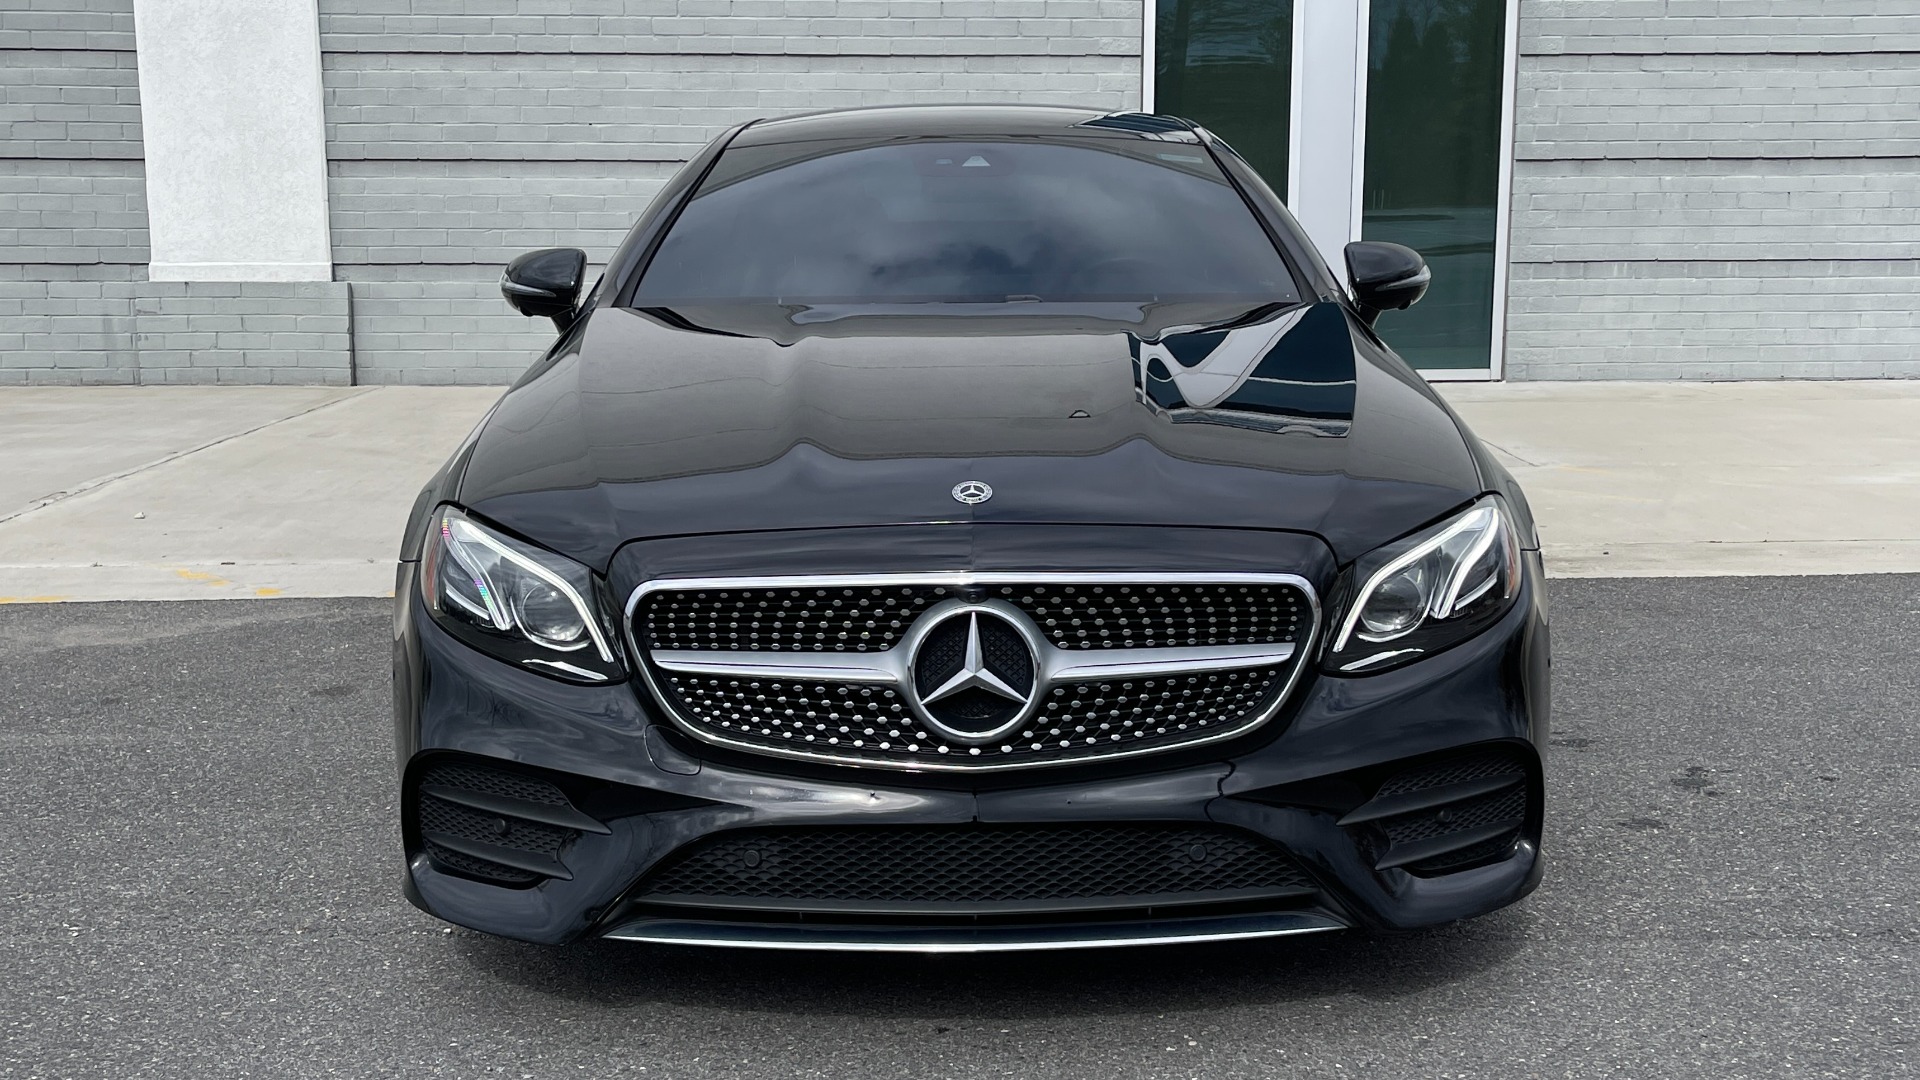 Used 2019 Mercedes-Benz E-CLASS E 450 PREMIUM / AMG LINE / PARK ASST / BSA / BURMESTER for sale $49,995 at Formula Imports in Charlotte NC 28227 10